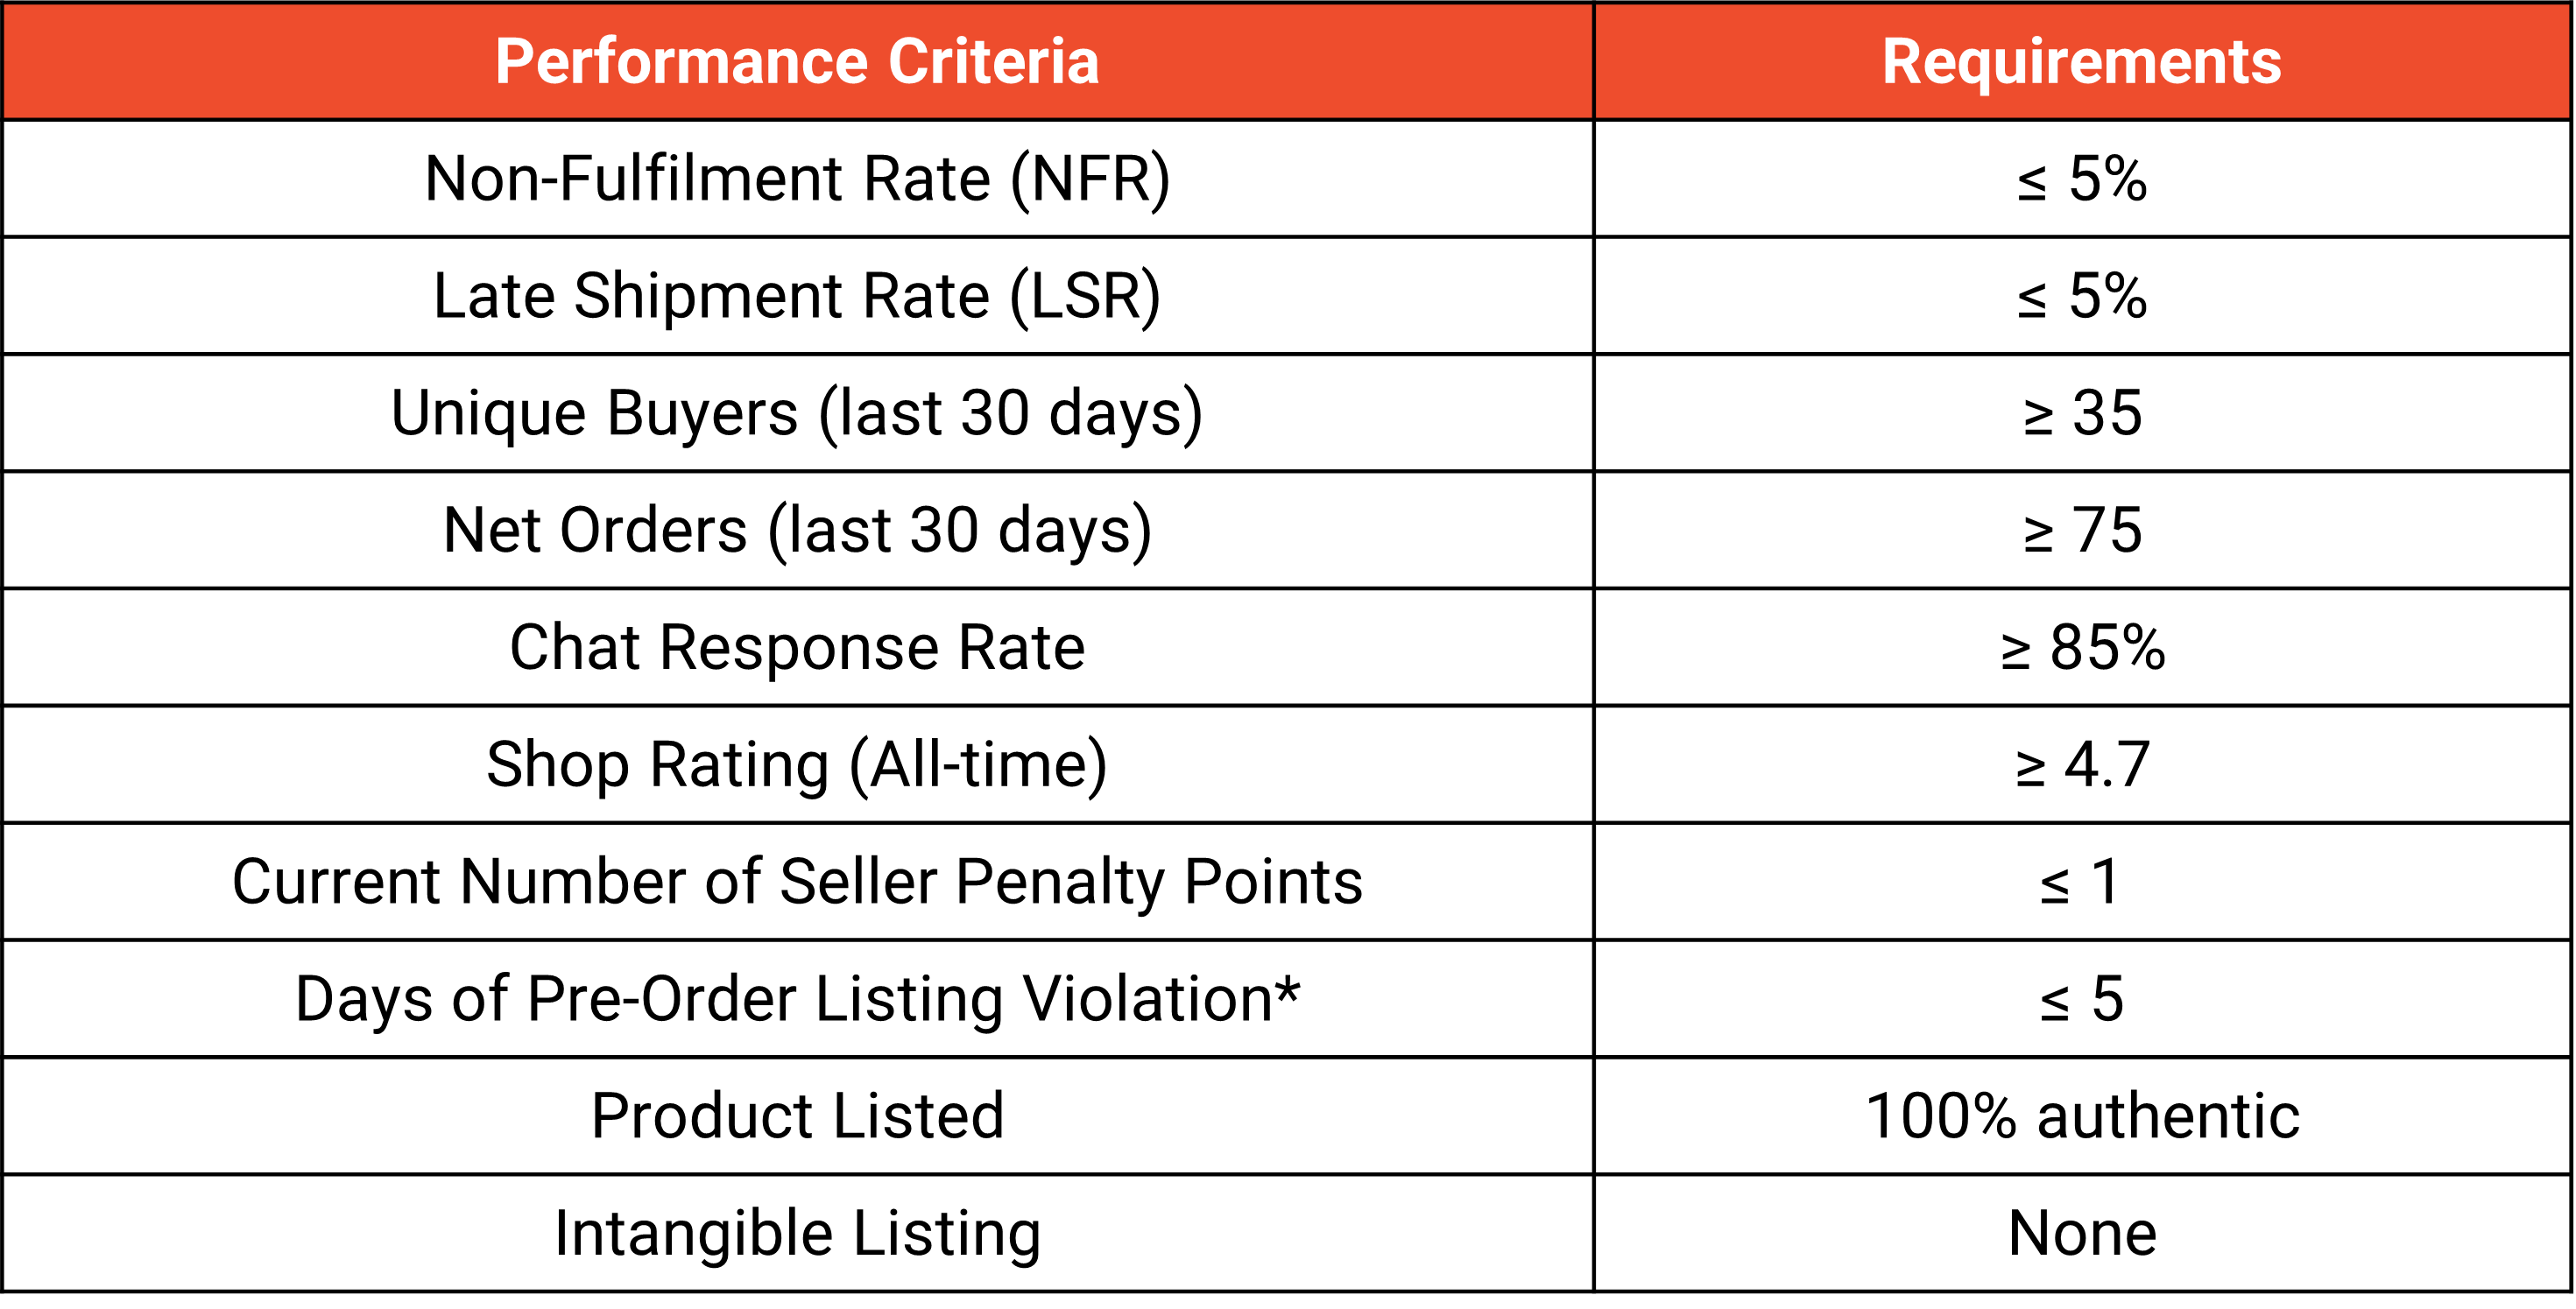 Standardised Shipping Rates for Shopee Supported Logistics (SSL) Channels